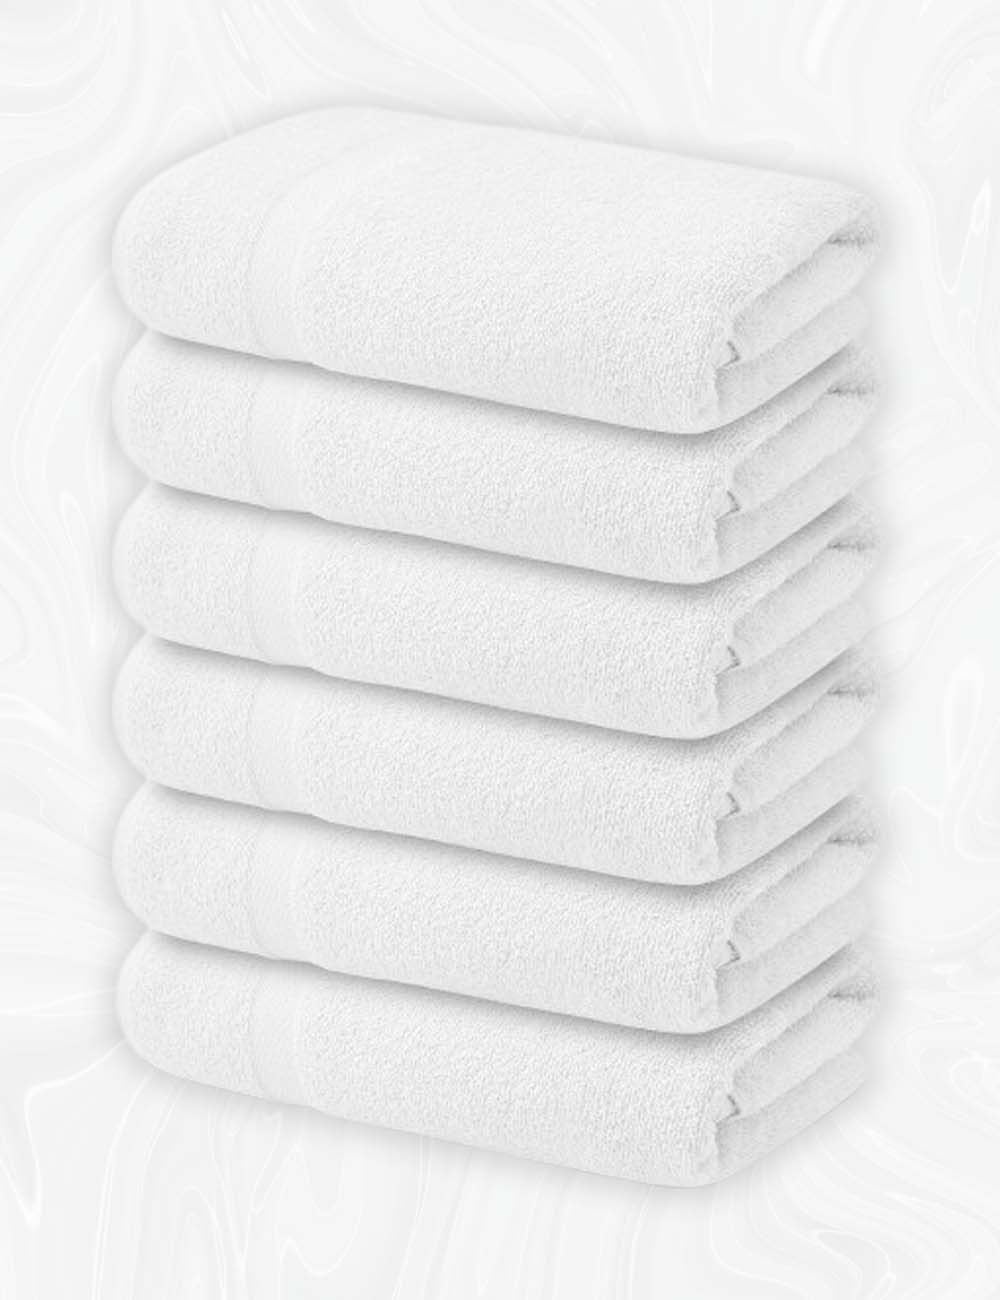 Home Labels Cotton Soft Spa Bath Towels, Ultra Soft Bath Towel, Home Gym Spa Hotel, Ideal for Daily use Highly Absorbent Hotel spa Bathroom Towel Collection | 24x48 Inch | Pack of 6 White